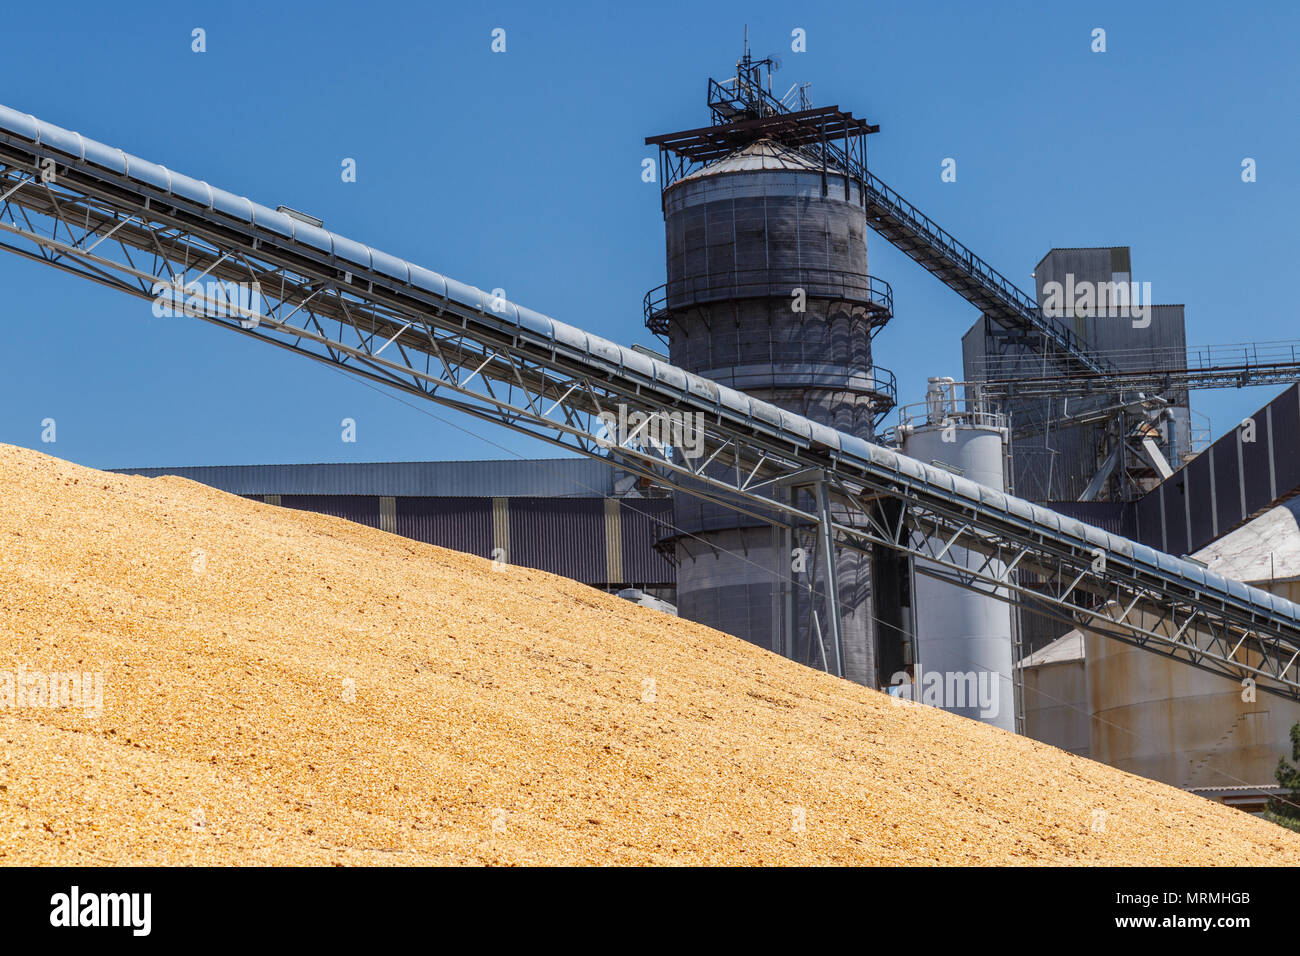 Corn and Grain Handling or Harvesting Terminal. Corn Can be Used for Food, Feed or Ethanol V Stock Photo